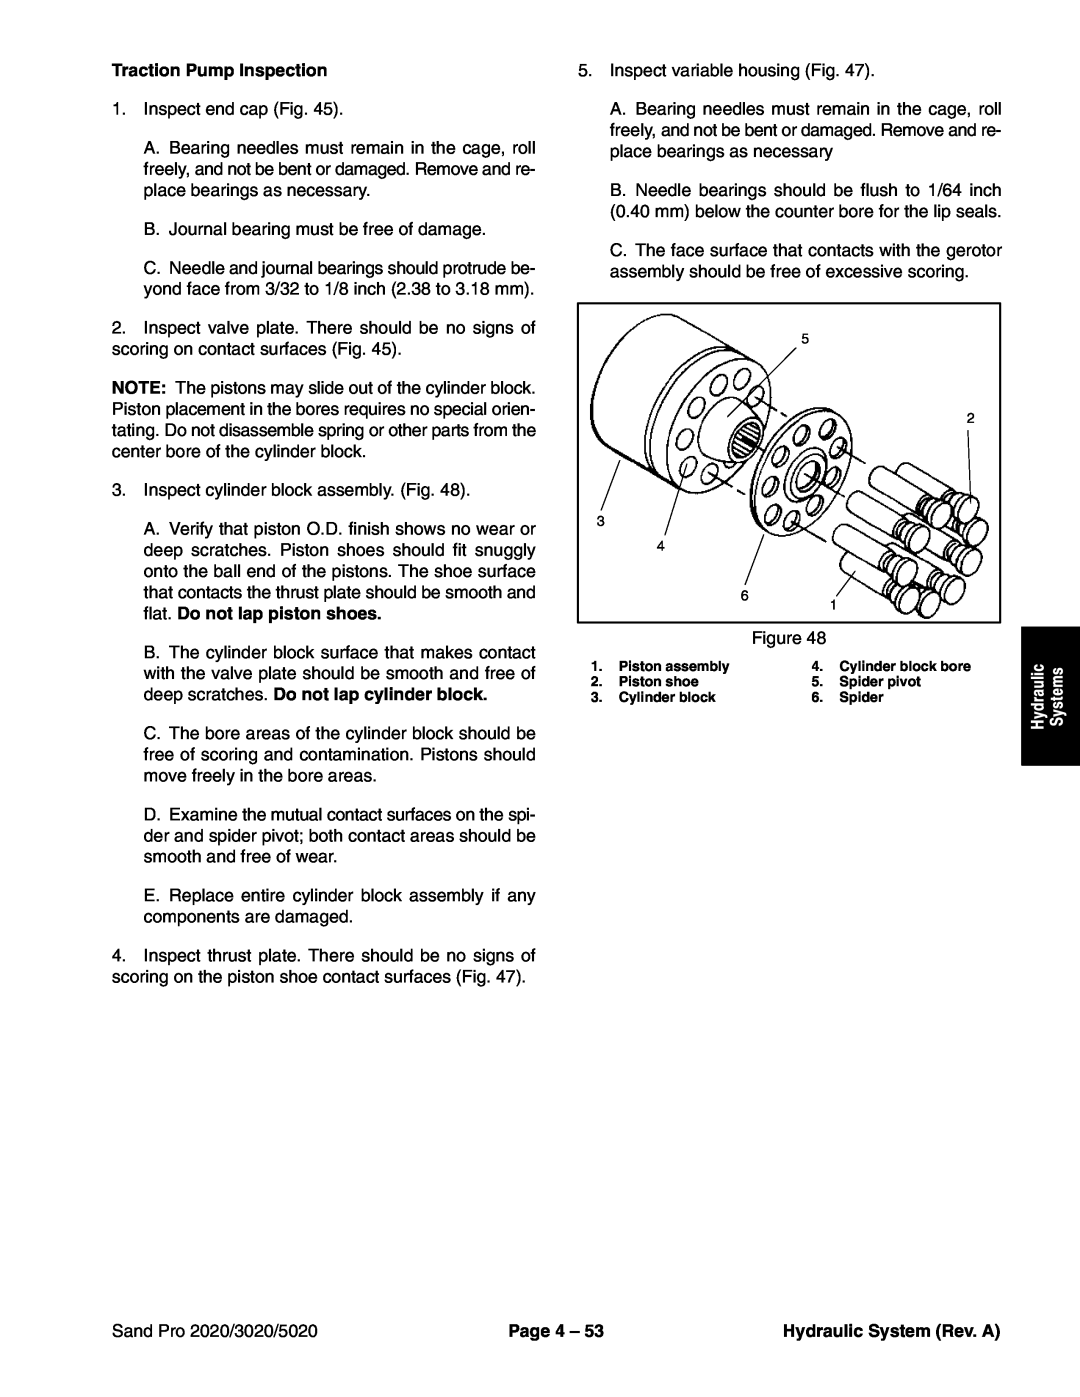 Toro service manual Traction Pump Inspection, Systems, Sand Pro 2020/3020/5020, Page 4, Hydraulic System Rev. A 